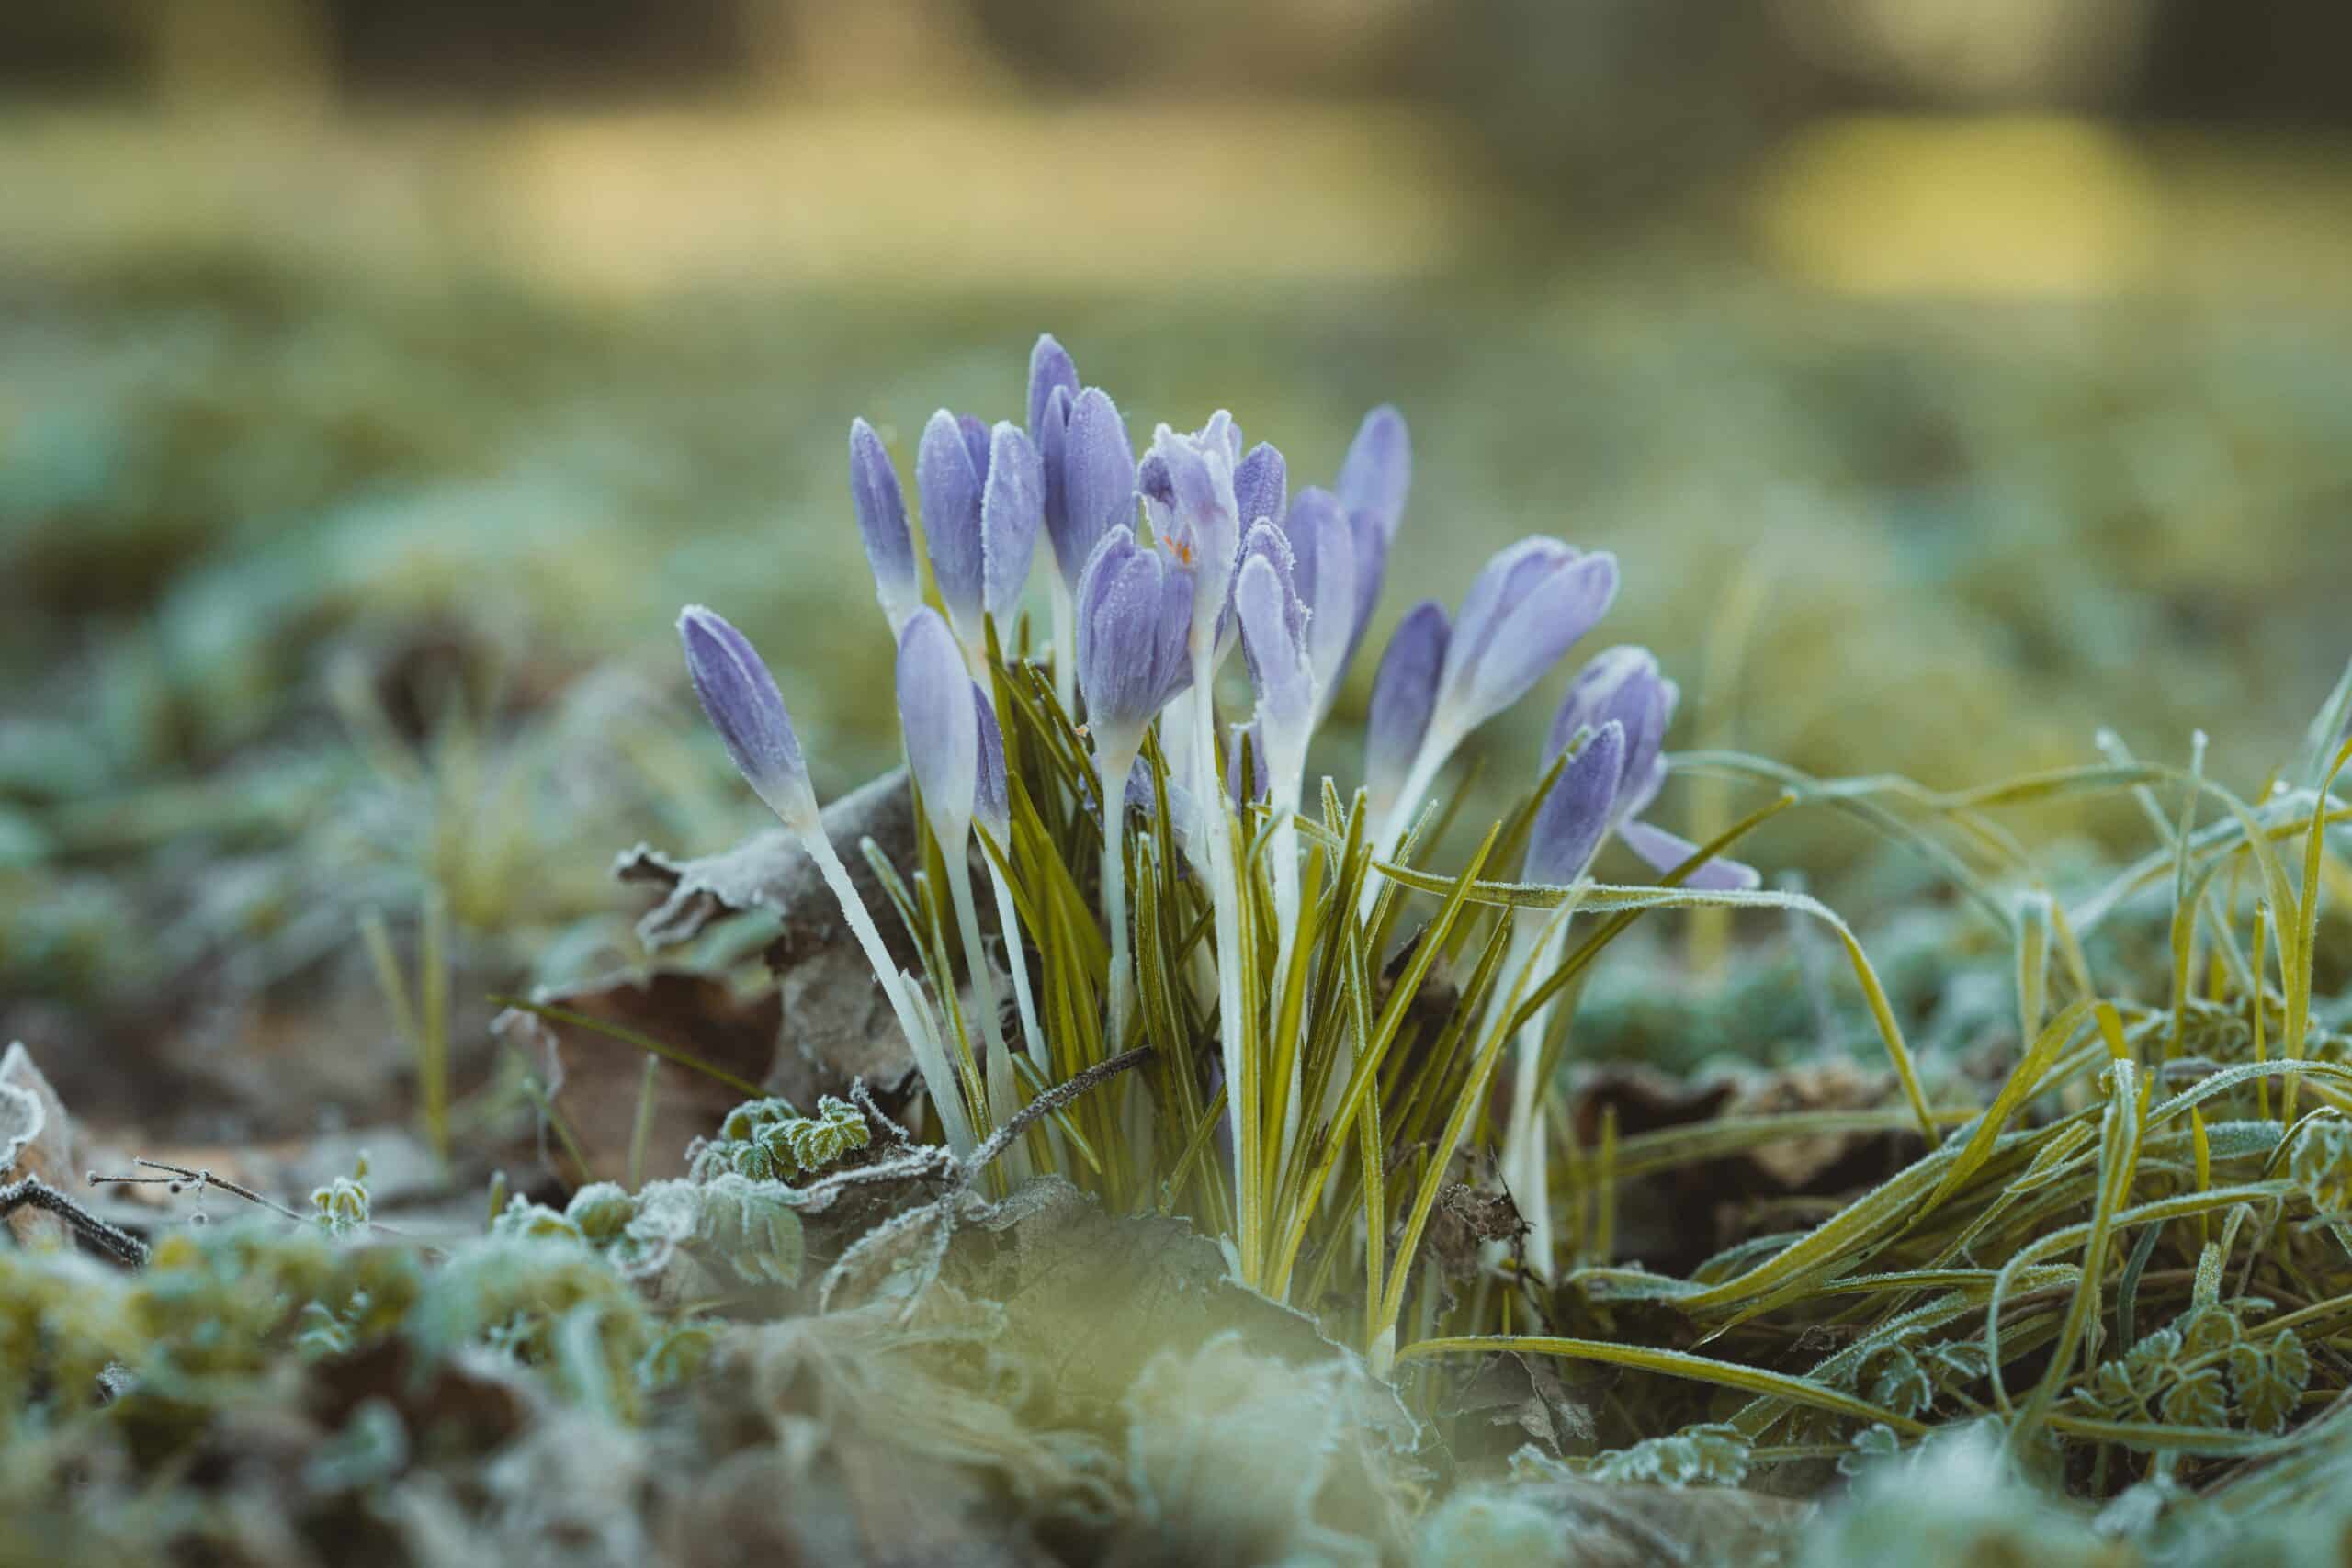 Photograph of blooming winter crocuses